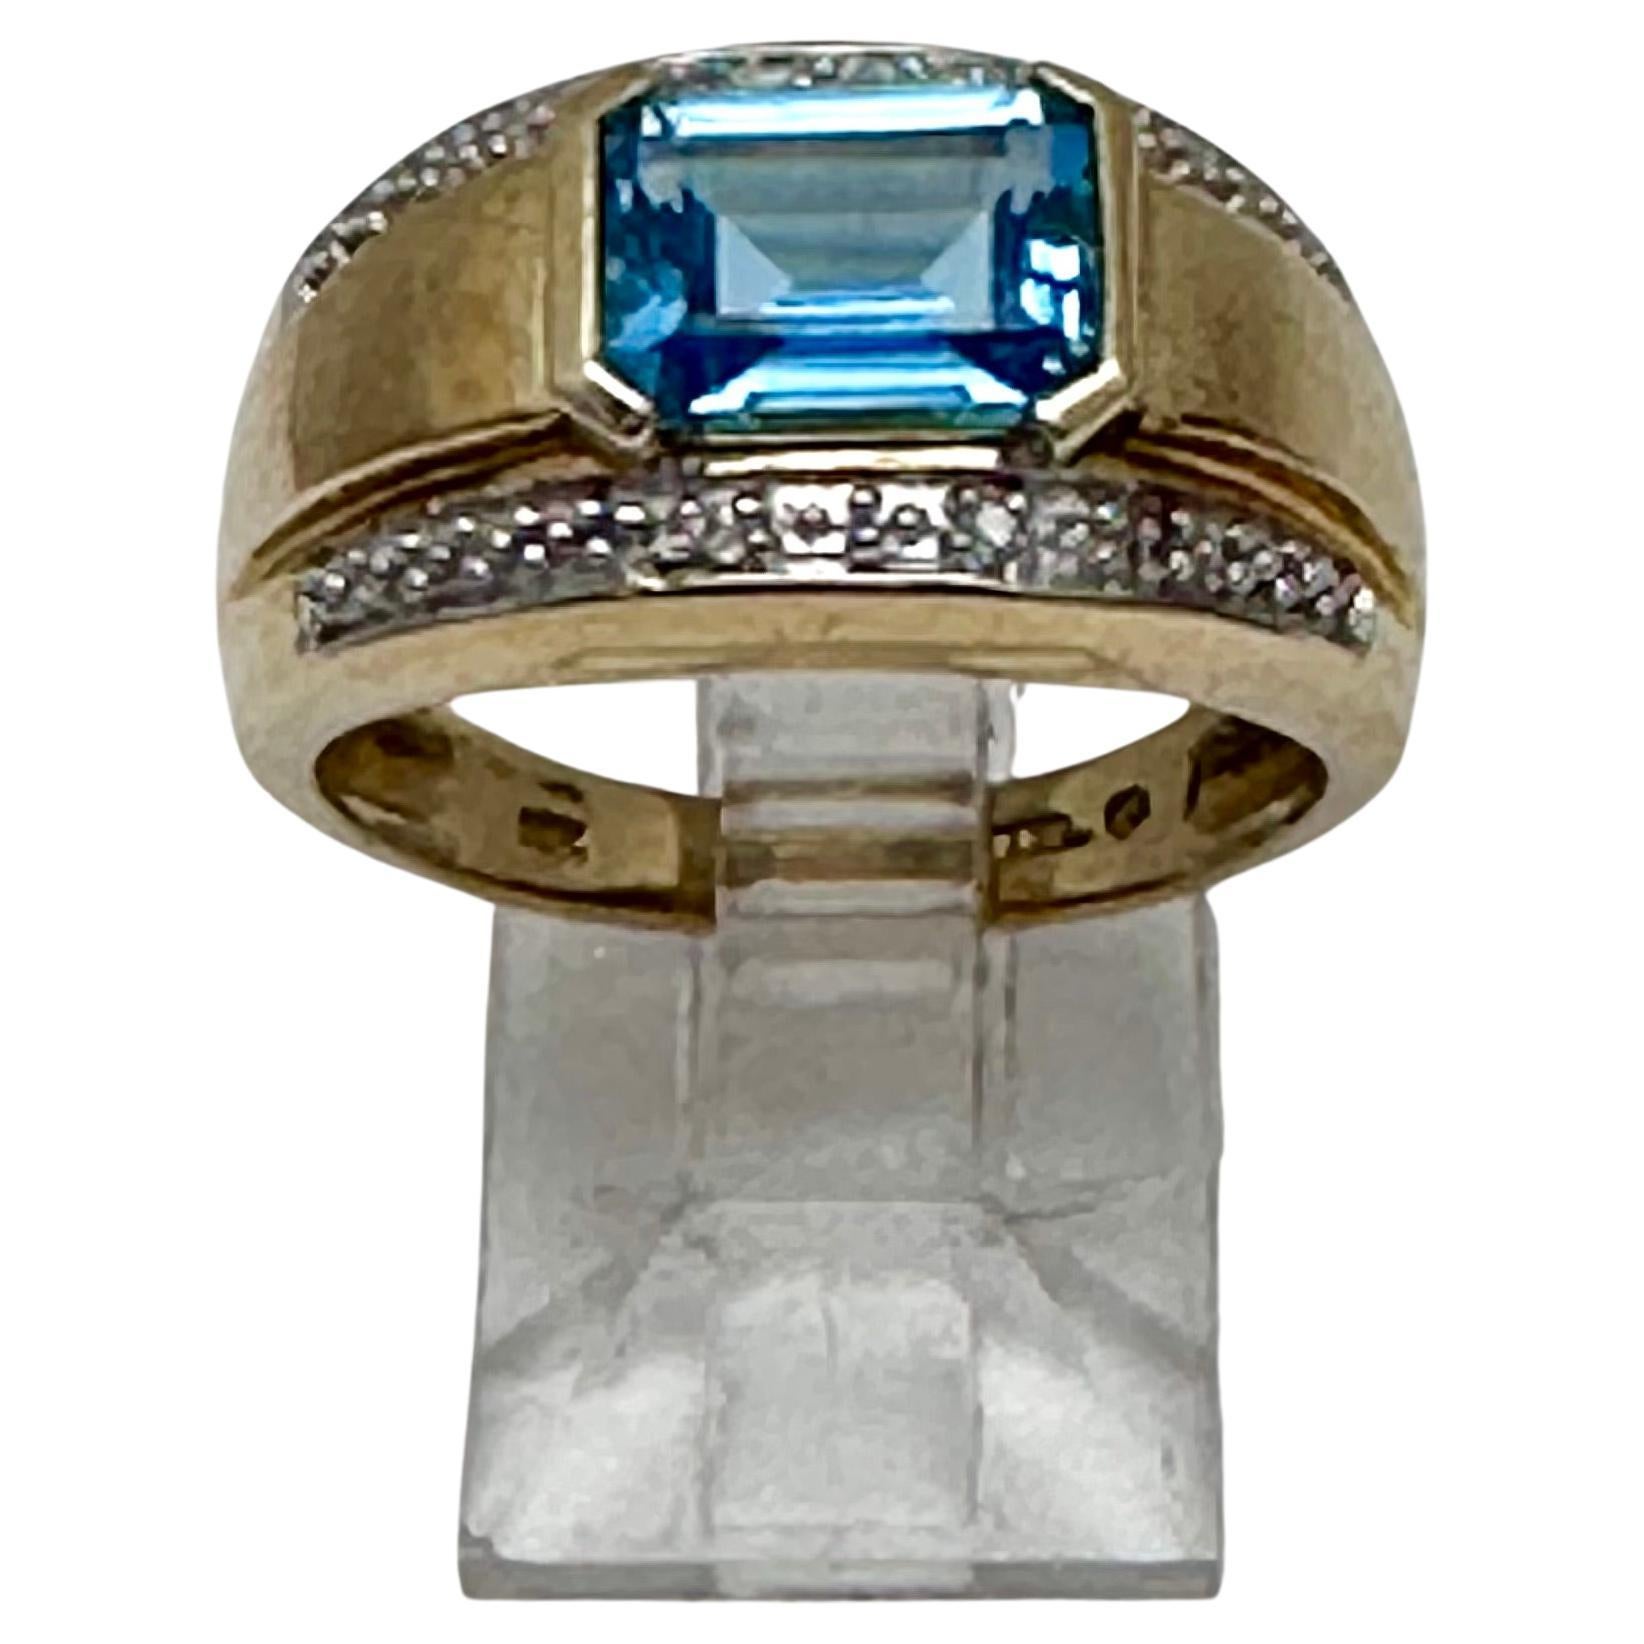 10k Yellow Gold 6mm x 8mm Emerald Cut Blue Topaz Diamond Ring Size 7 For Sale